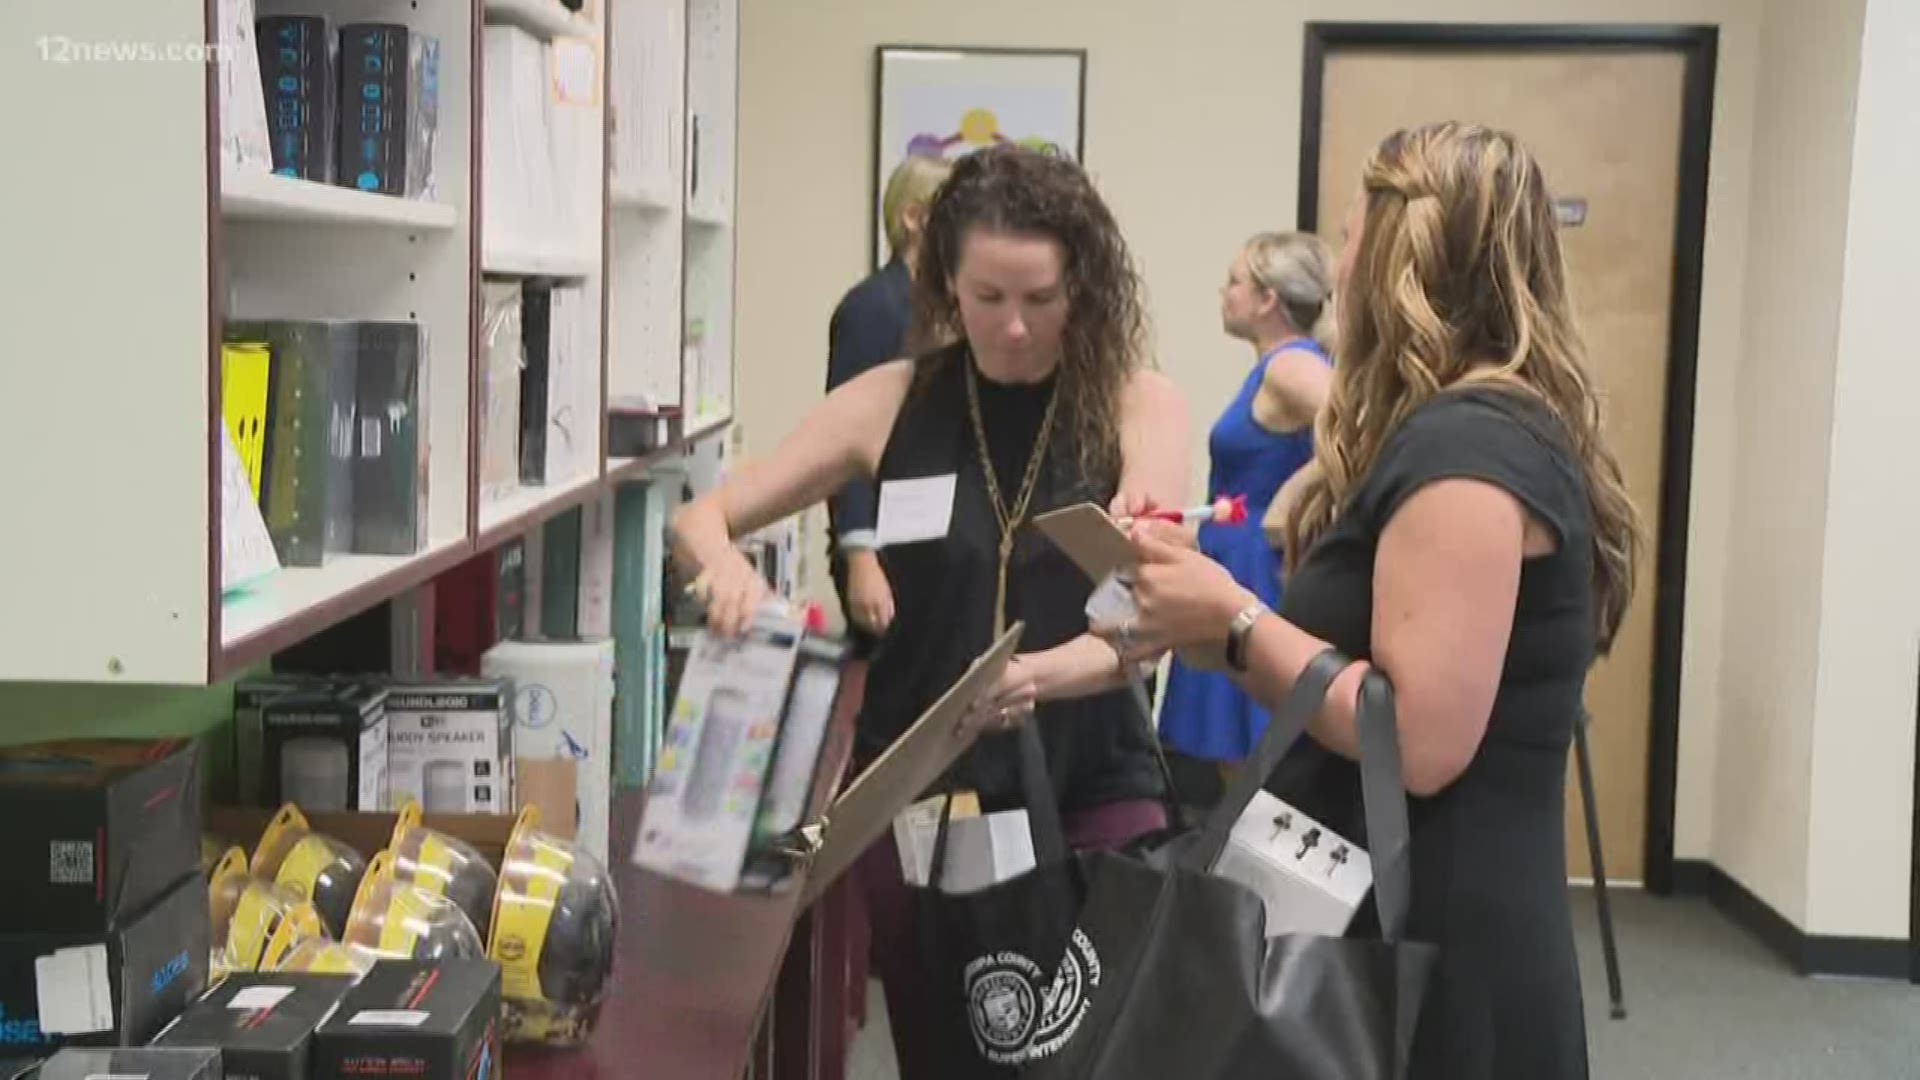 The Office of the Maricopa County Schools Superintendent has opened a STEM resource center for teachers. The center is stocked with all kinds of technology teachers can use for their lessons.